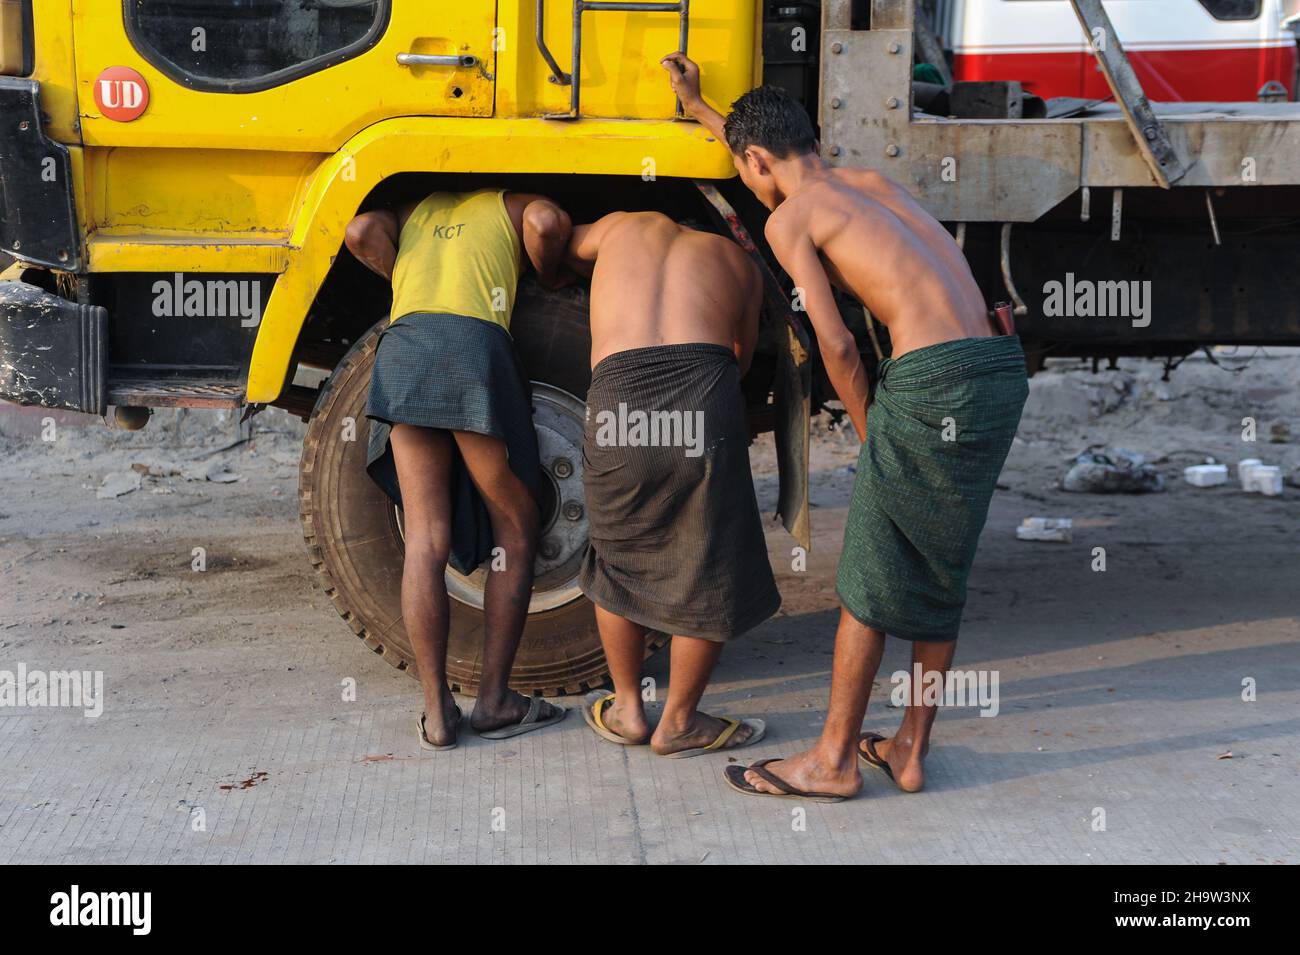 '10.02.2014, Myanmar, , Yangon - Three young workers in traditional wraparound skirts (longyi) inspect a defective truck at the roadside.. 0SL140210D0 Stock Photo